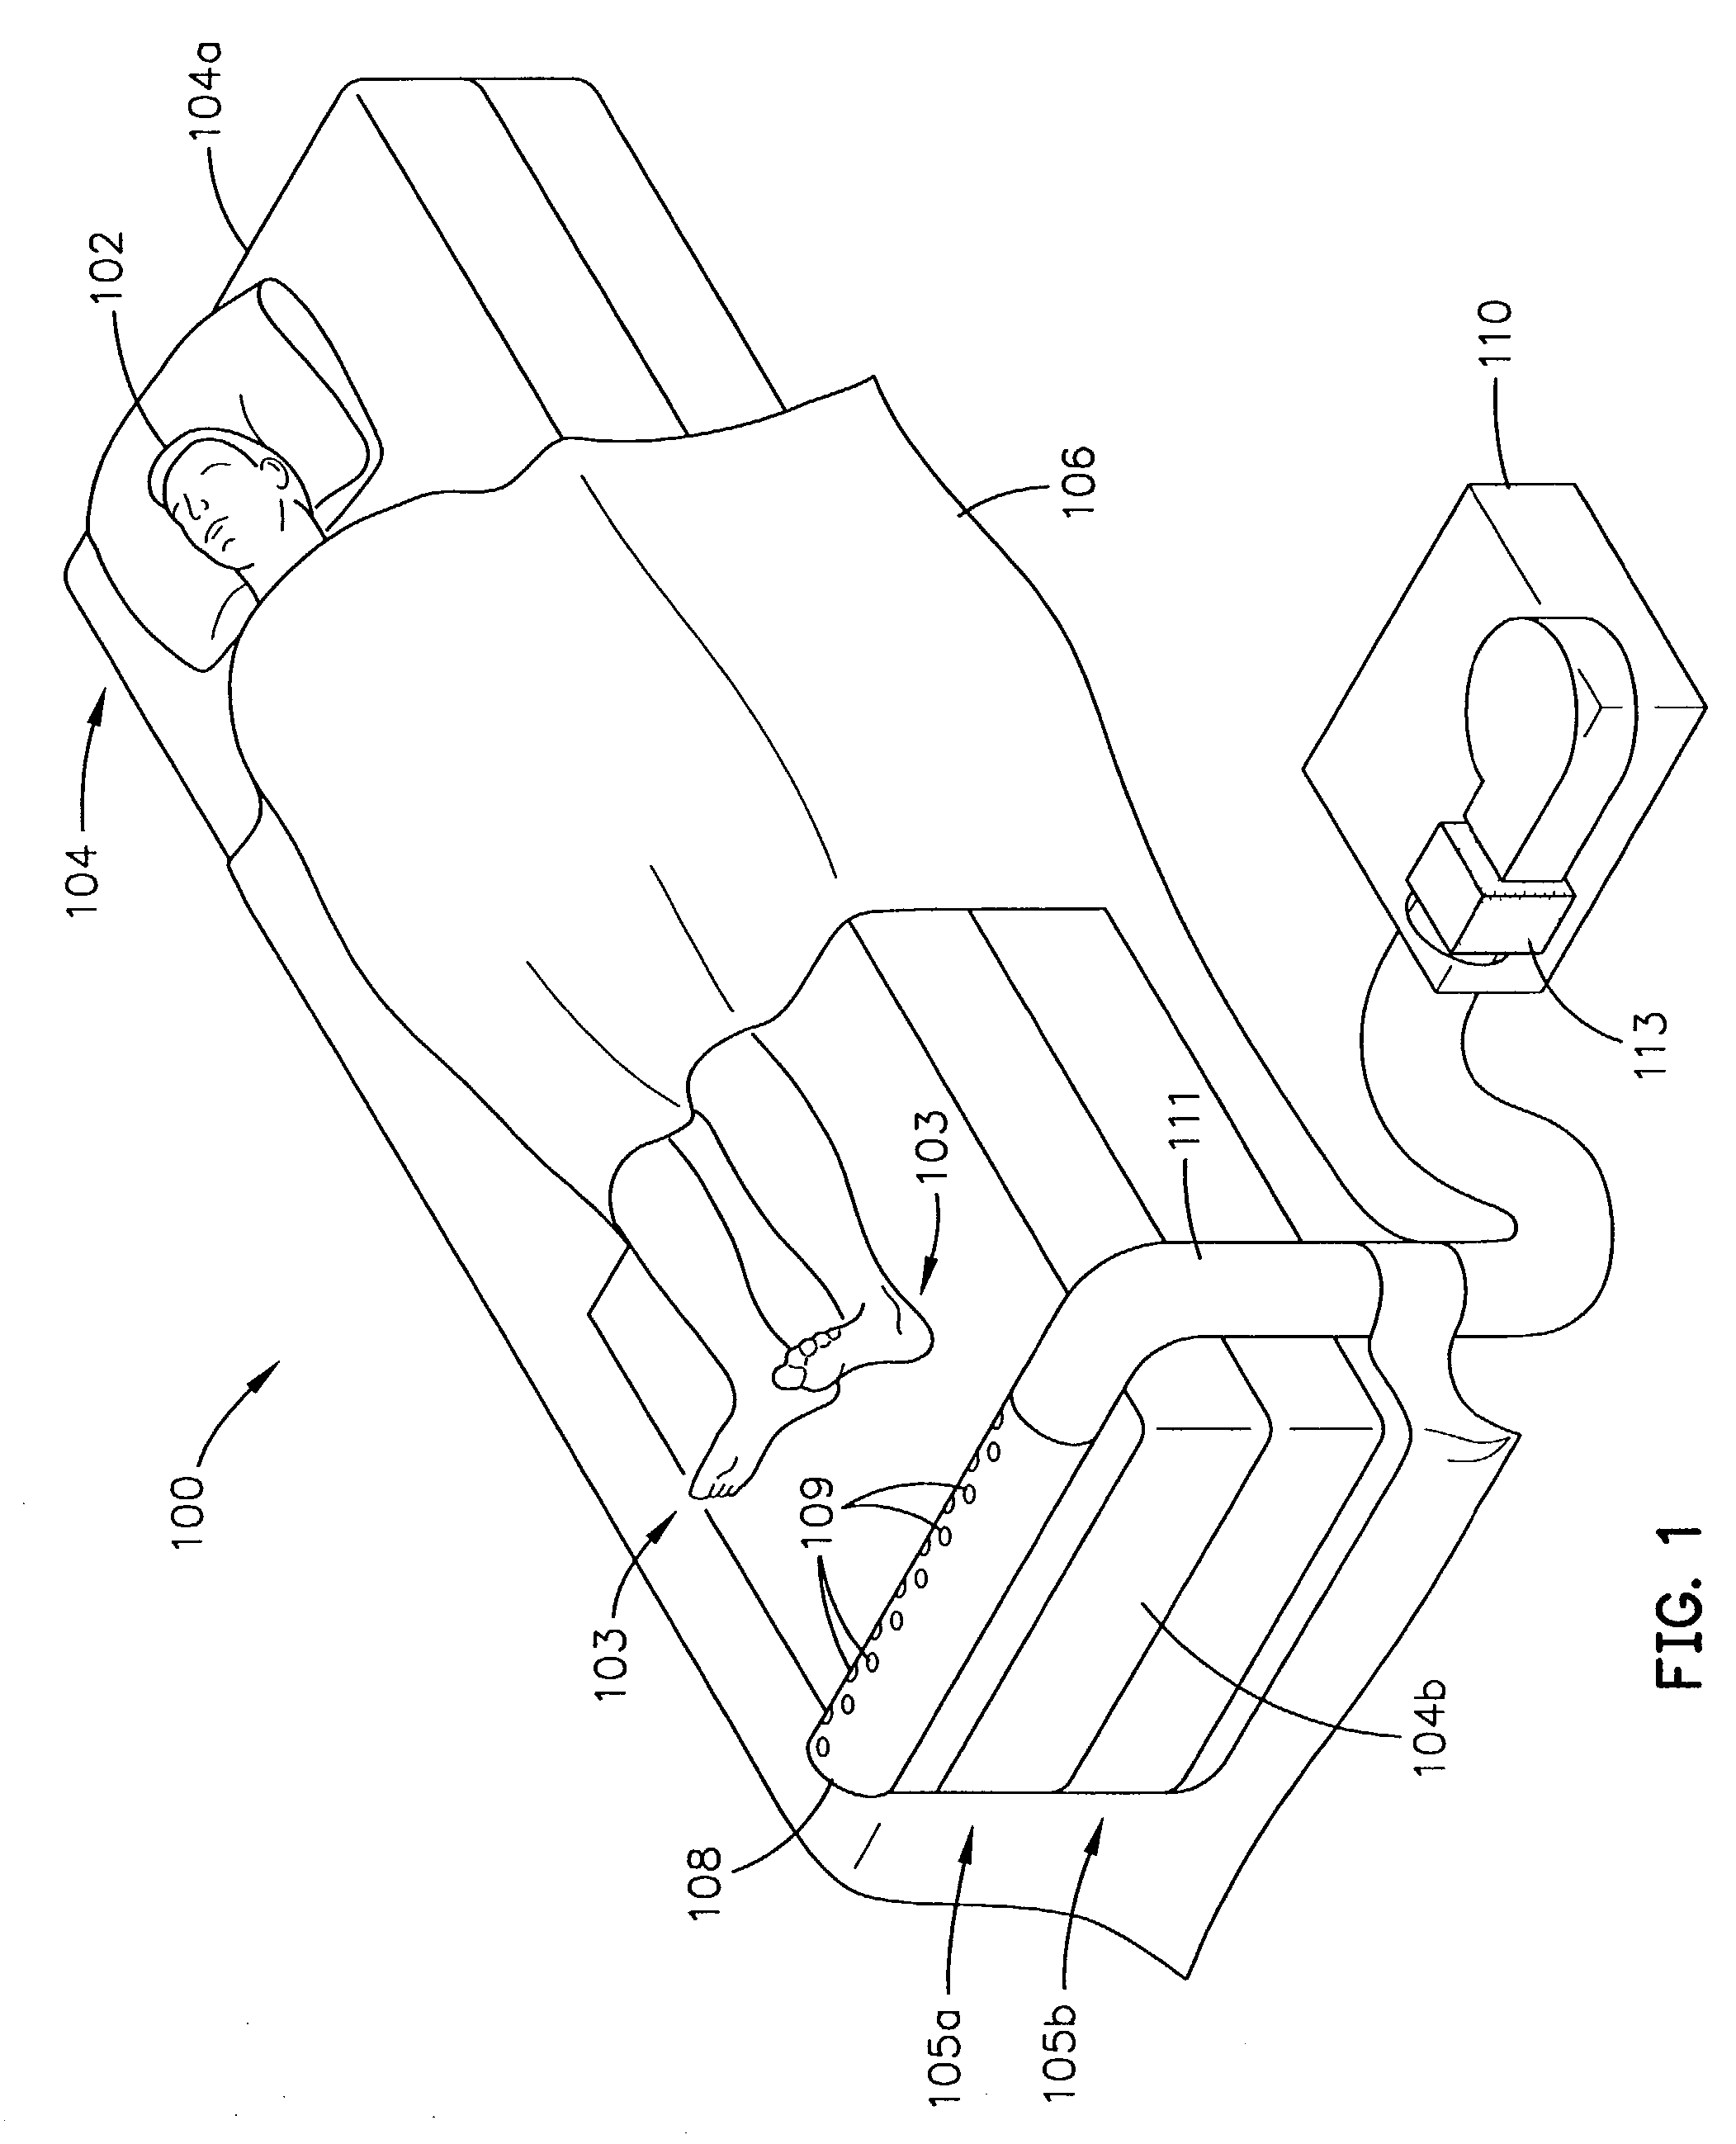 System for warming lower extremities of supine persons